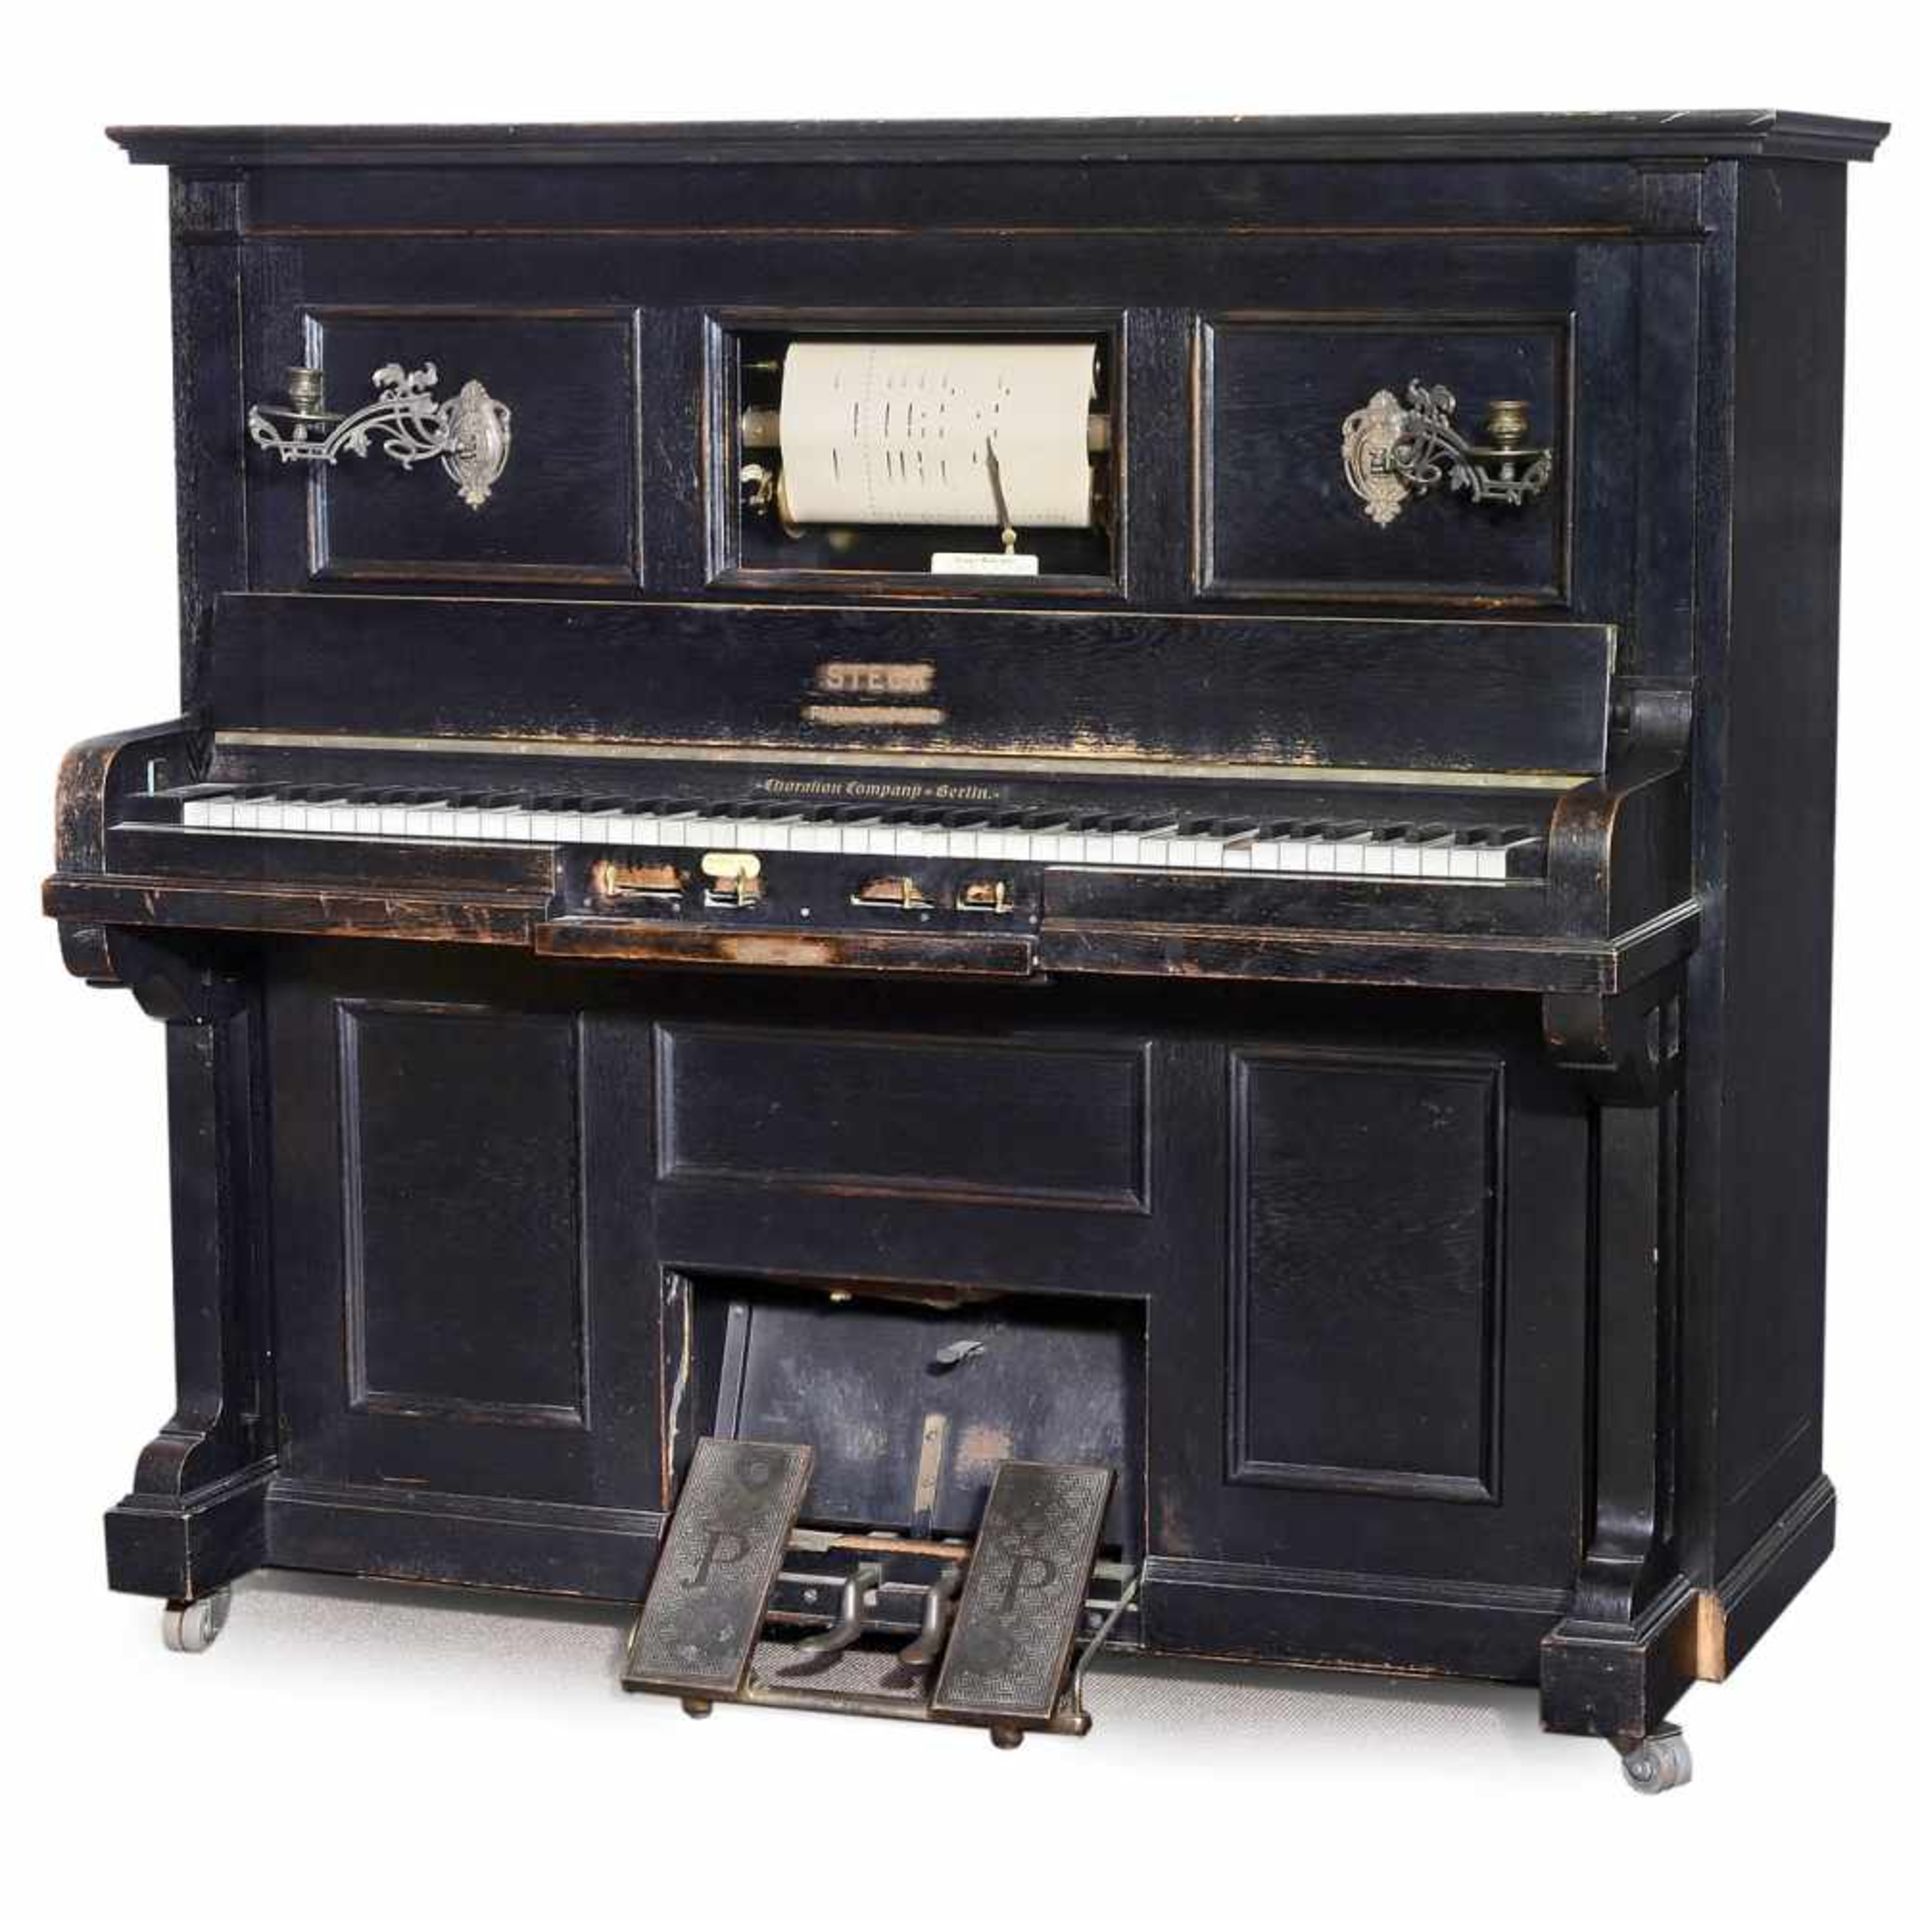 Steck Pianola-Piano, c. 1914Made by Steck Piano-Fabrik, Gotha, Germany. For 65-note rolls, foot-